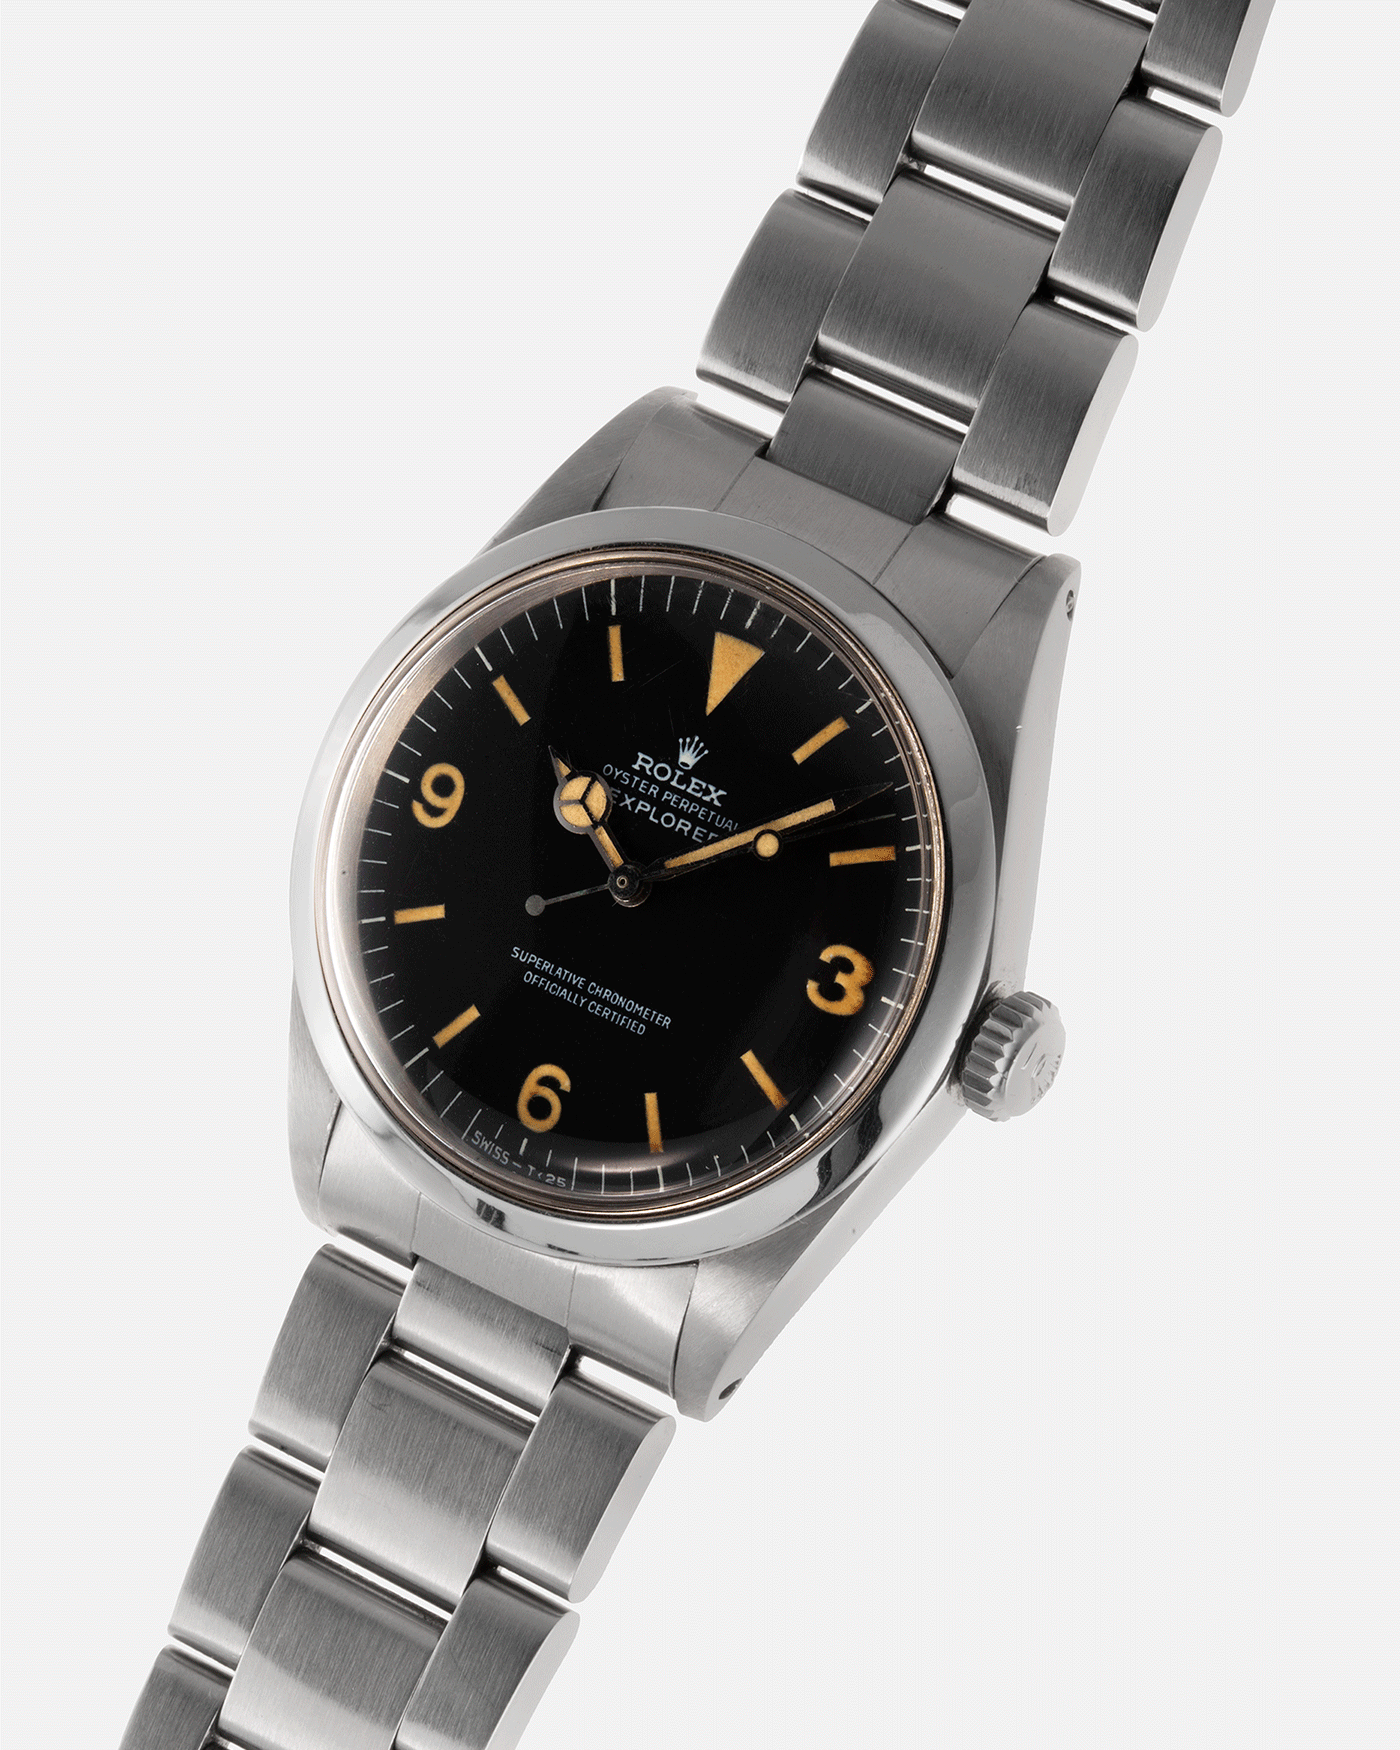 Brand: Rolex Year: 1972 Model: Explorer Reference Number: 1016 Serial Number: 2,9XXX,XXX Material: Stainless Steel Movement: Cal. 1570 Case Diameter: 36mm Lug Width: 20mm Bracelet/Strap: Rolex 78360 Oyster Bracelet with 558 end links